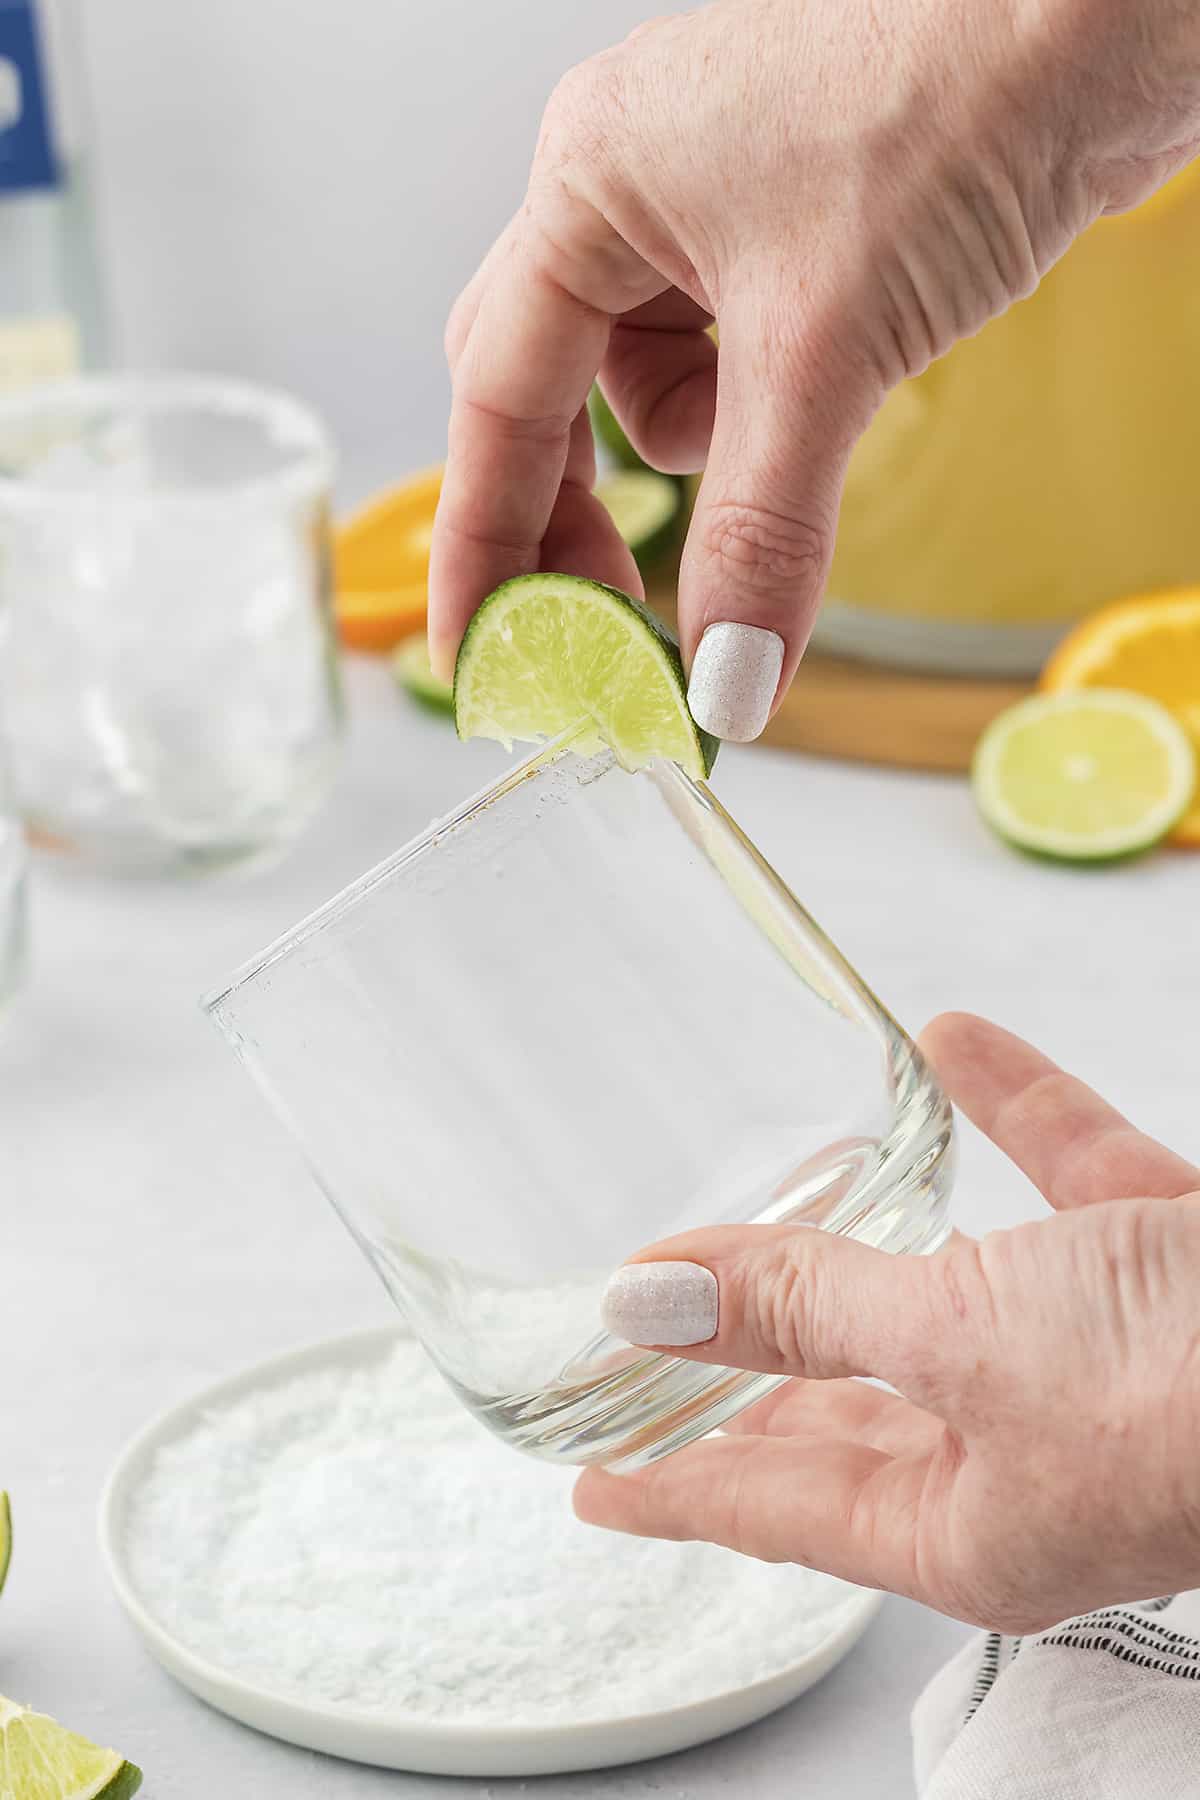 Hand rubbing a lime wedge around the edge of a glass.